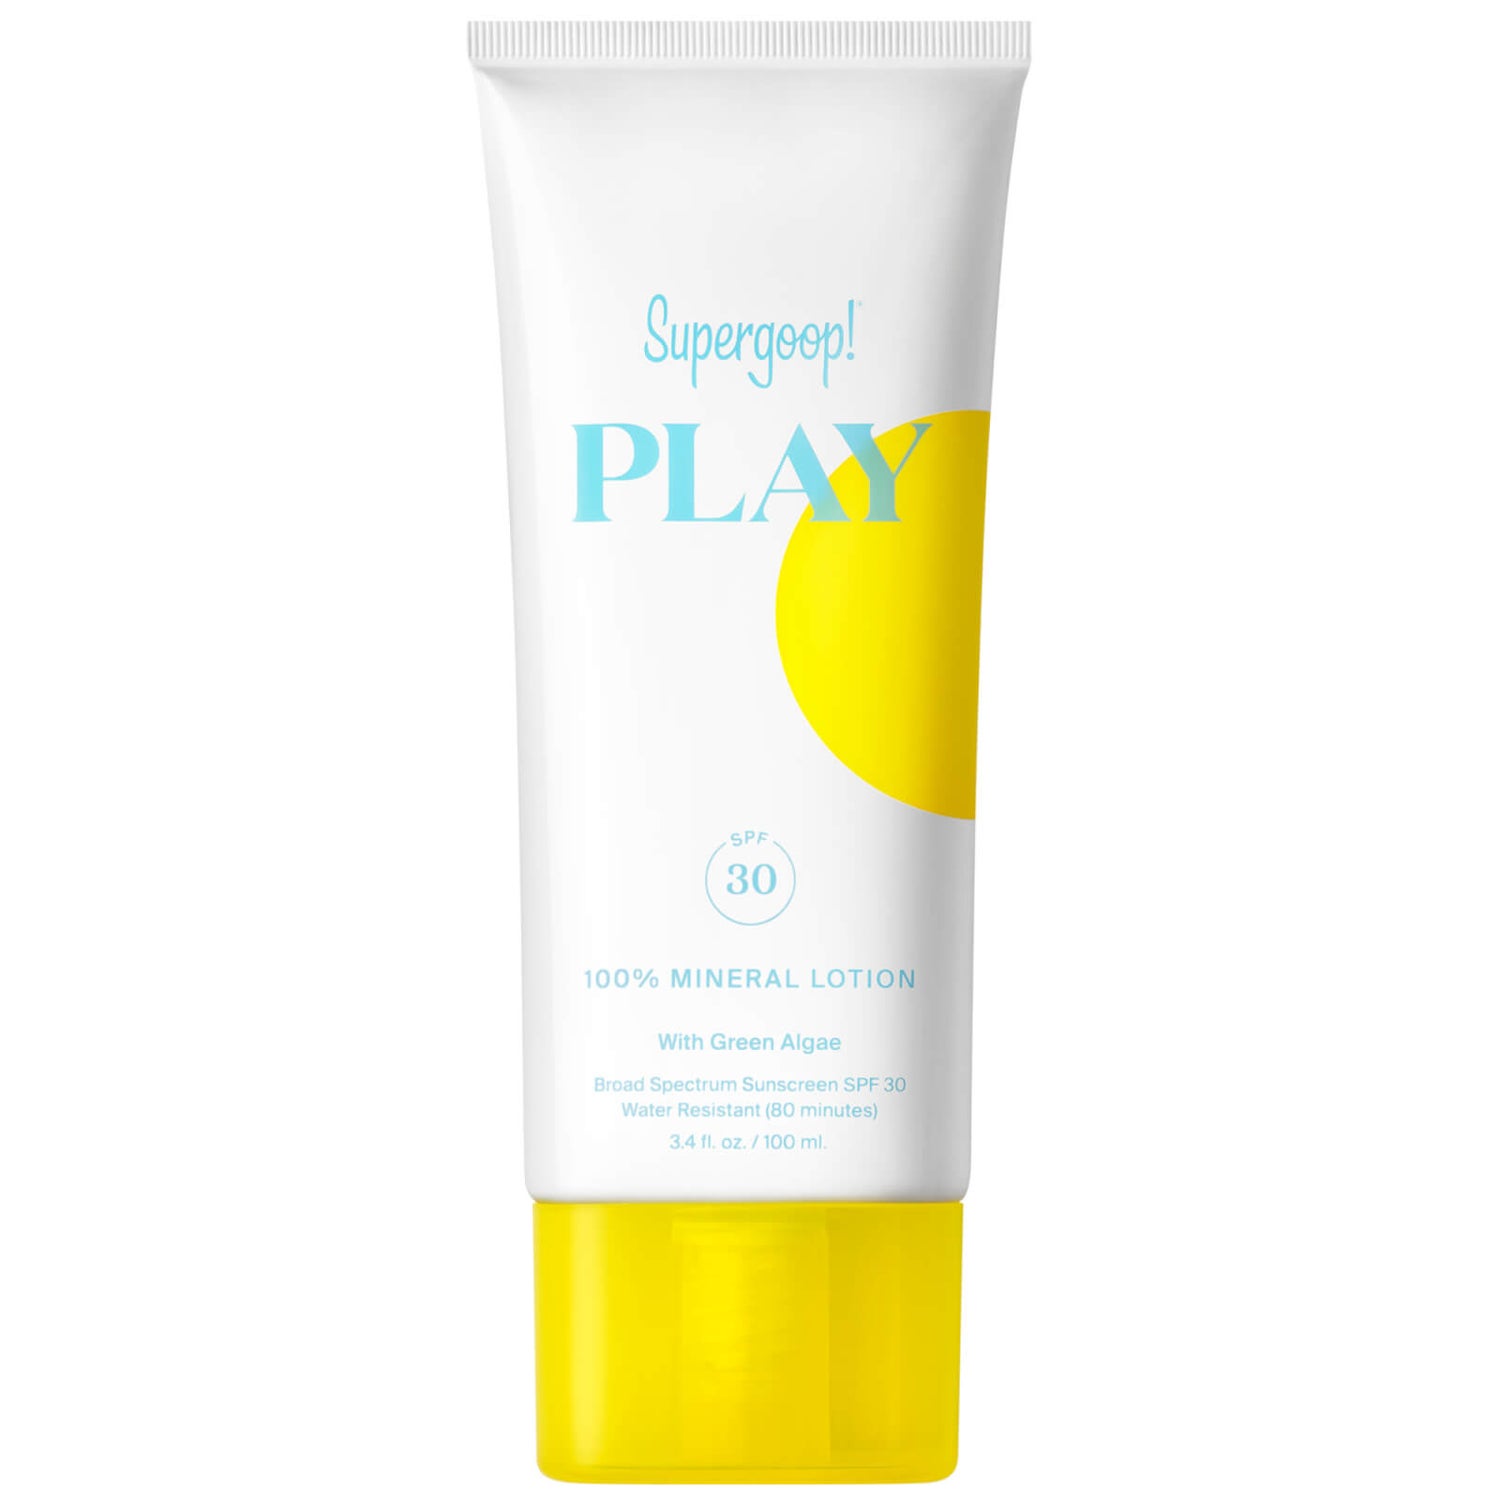 Supergoop! PLAY 100% Mineral Lotion SPF30 with Green Algae 3.4 fl. oz